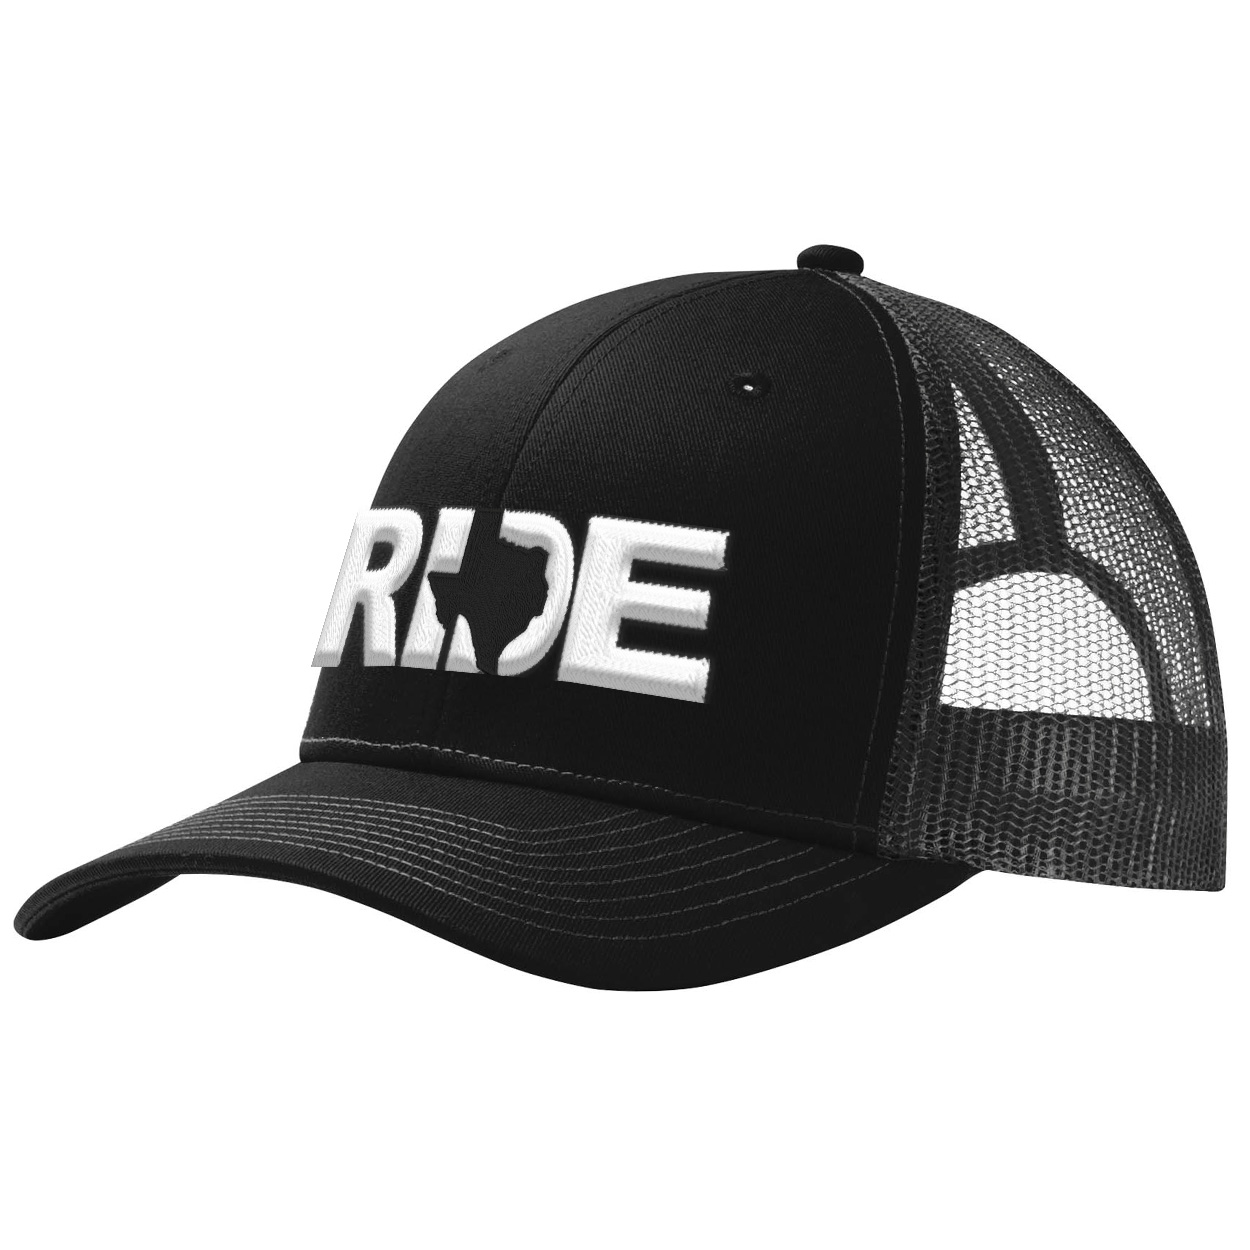 Ride Texas Classic Pro 3D Puff Embroidered Snapback Trucker Hat Black/Gray